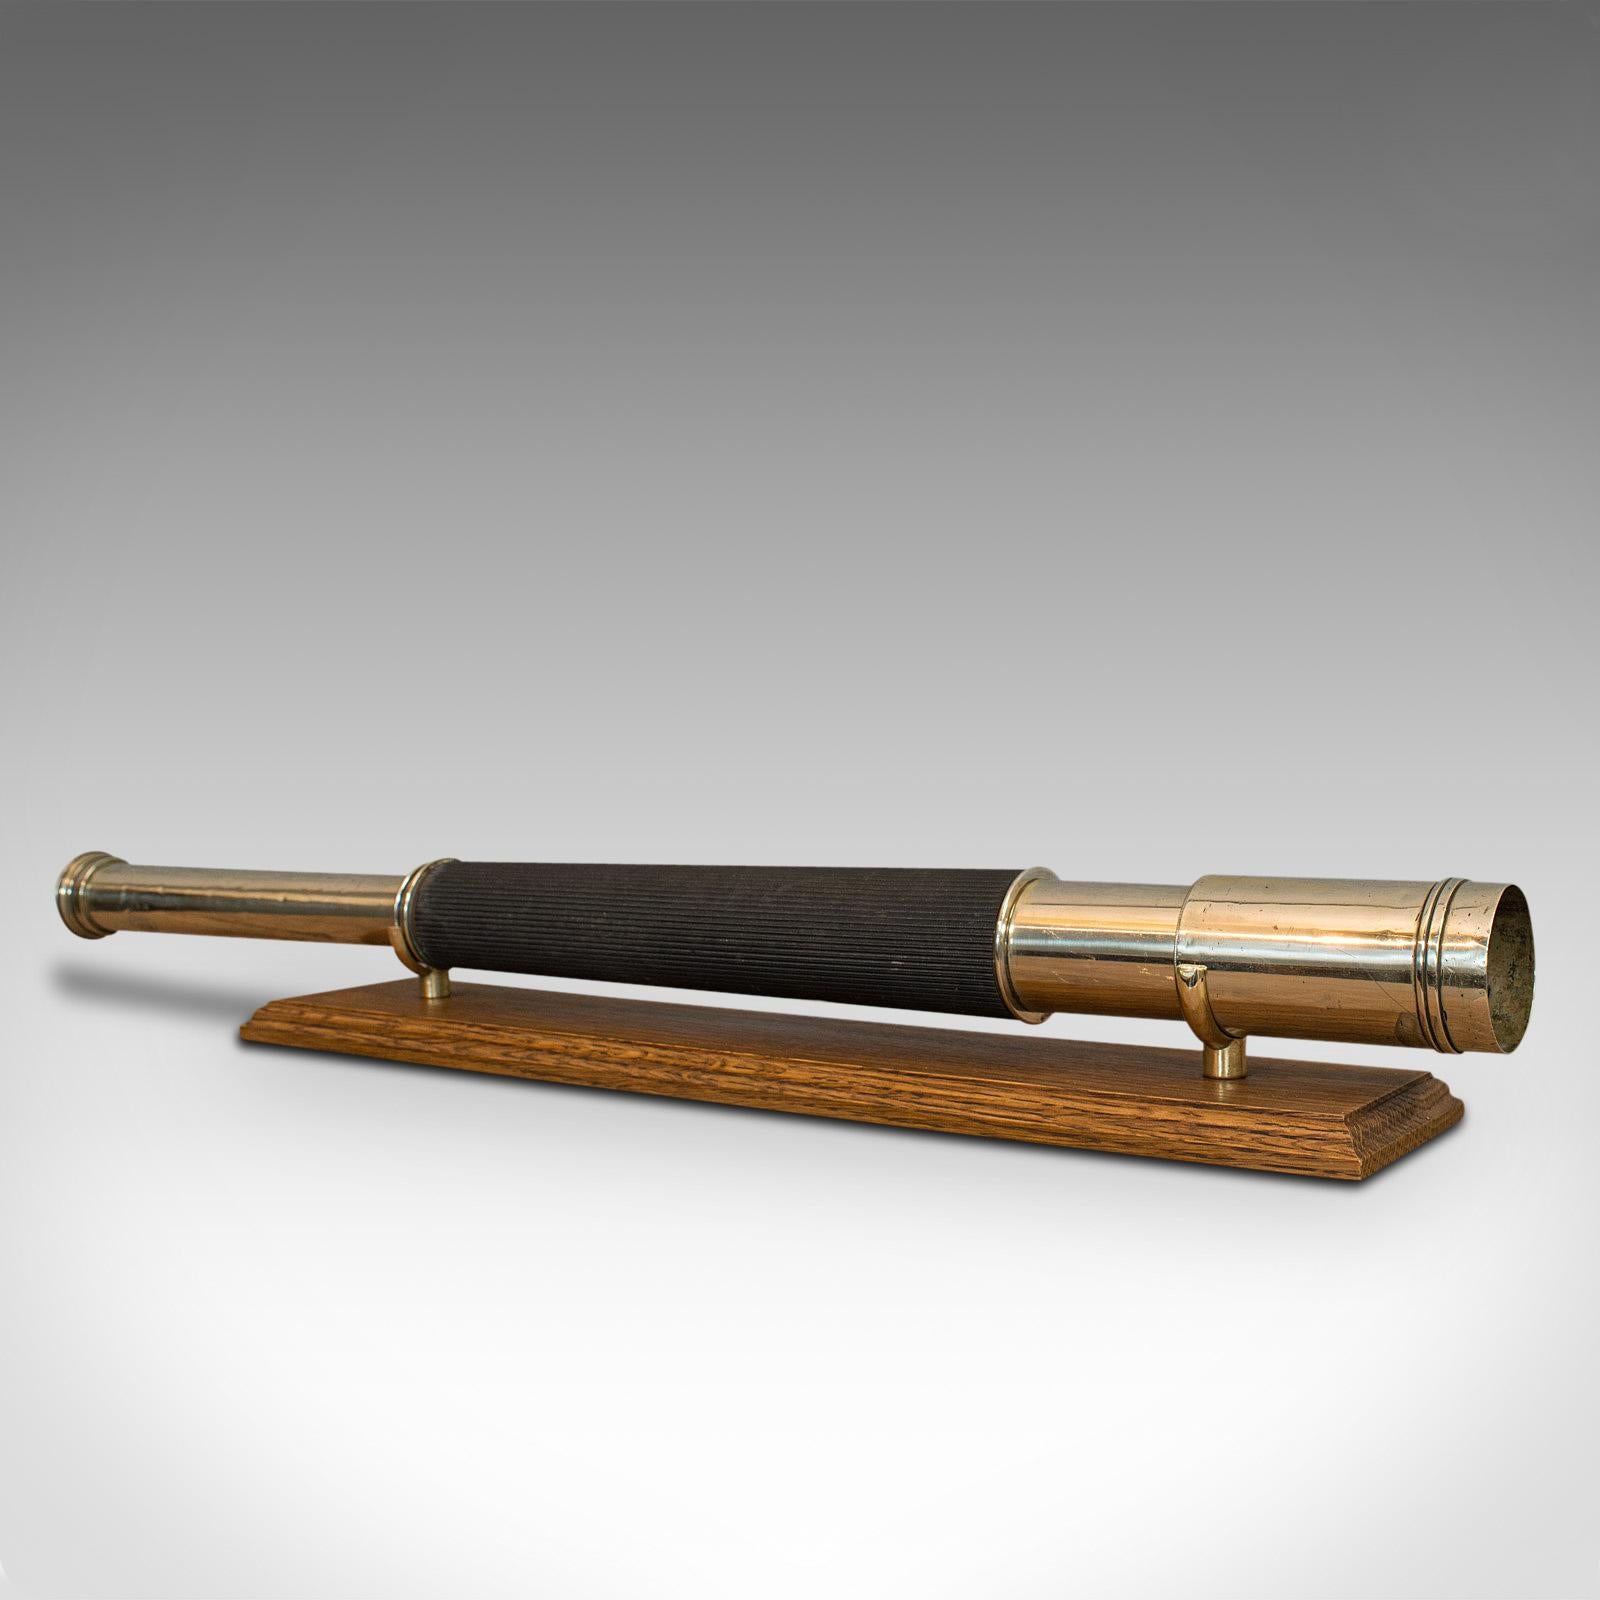 This is a vintage telescope. An English, brass 'officer of the watch' single draw refractor by Ross of London, dating to the mid-20th century, circa 1935.

Perfect for bird watching, landscape appreciation, wildlife, or maritime observation.